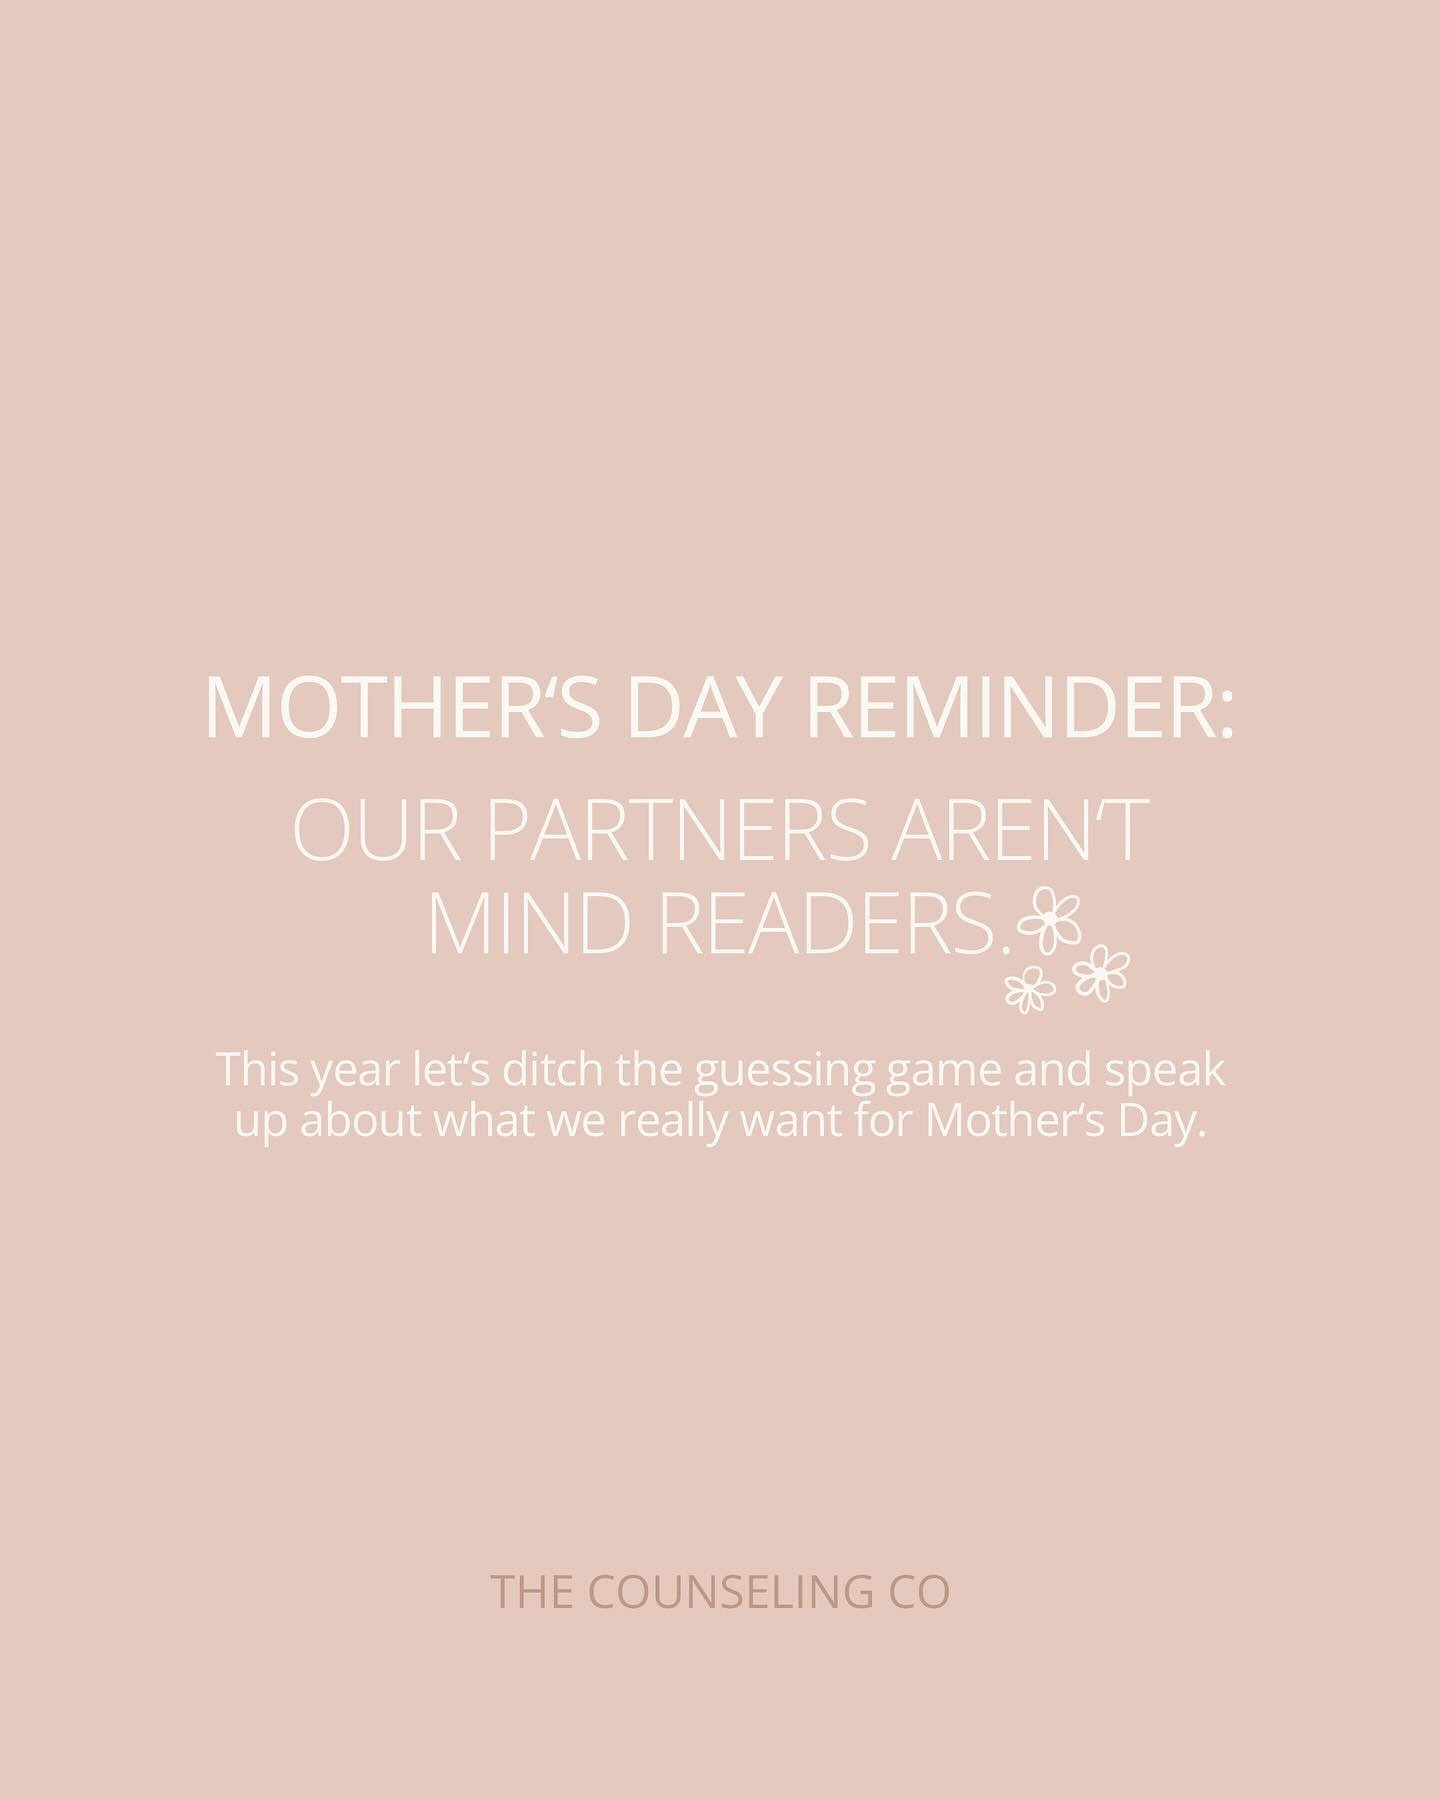 Before it&rsquo;s too late, take time to think about what you want for Mother&rsquo;s Day. If you don&rsquo;t know what you want, your partner/family members probably don&rsquo;t know what you want either. It&rsquo;s common to not even realize you ha